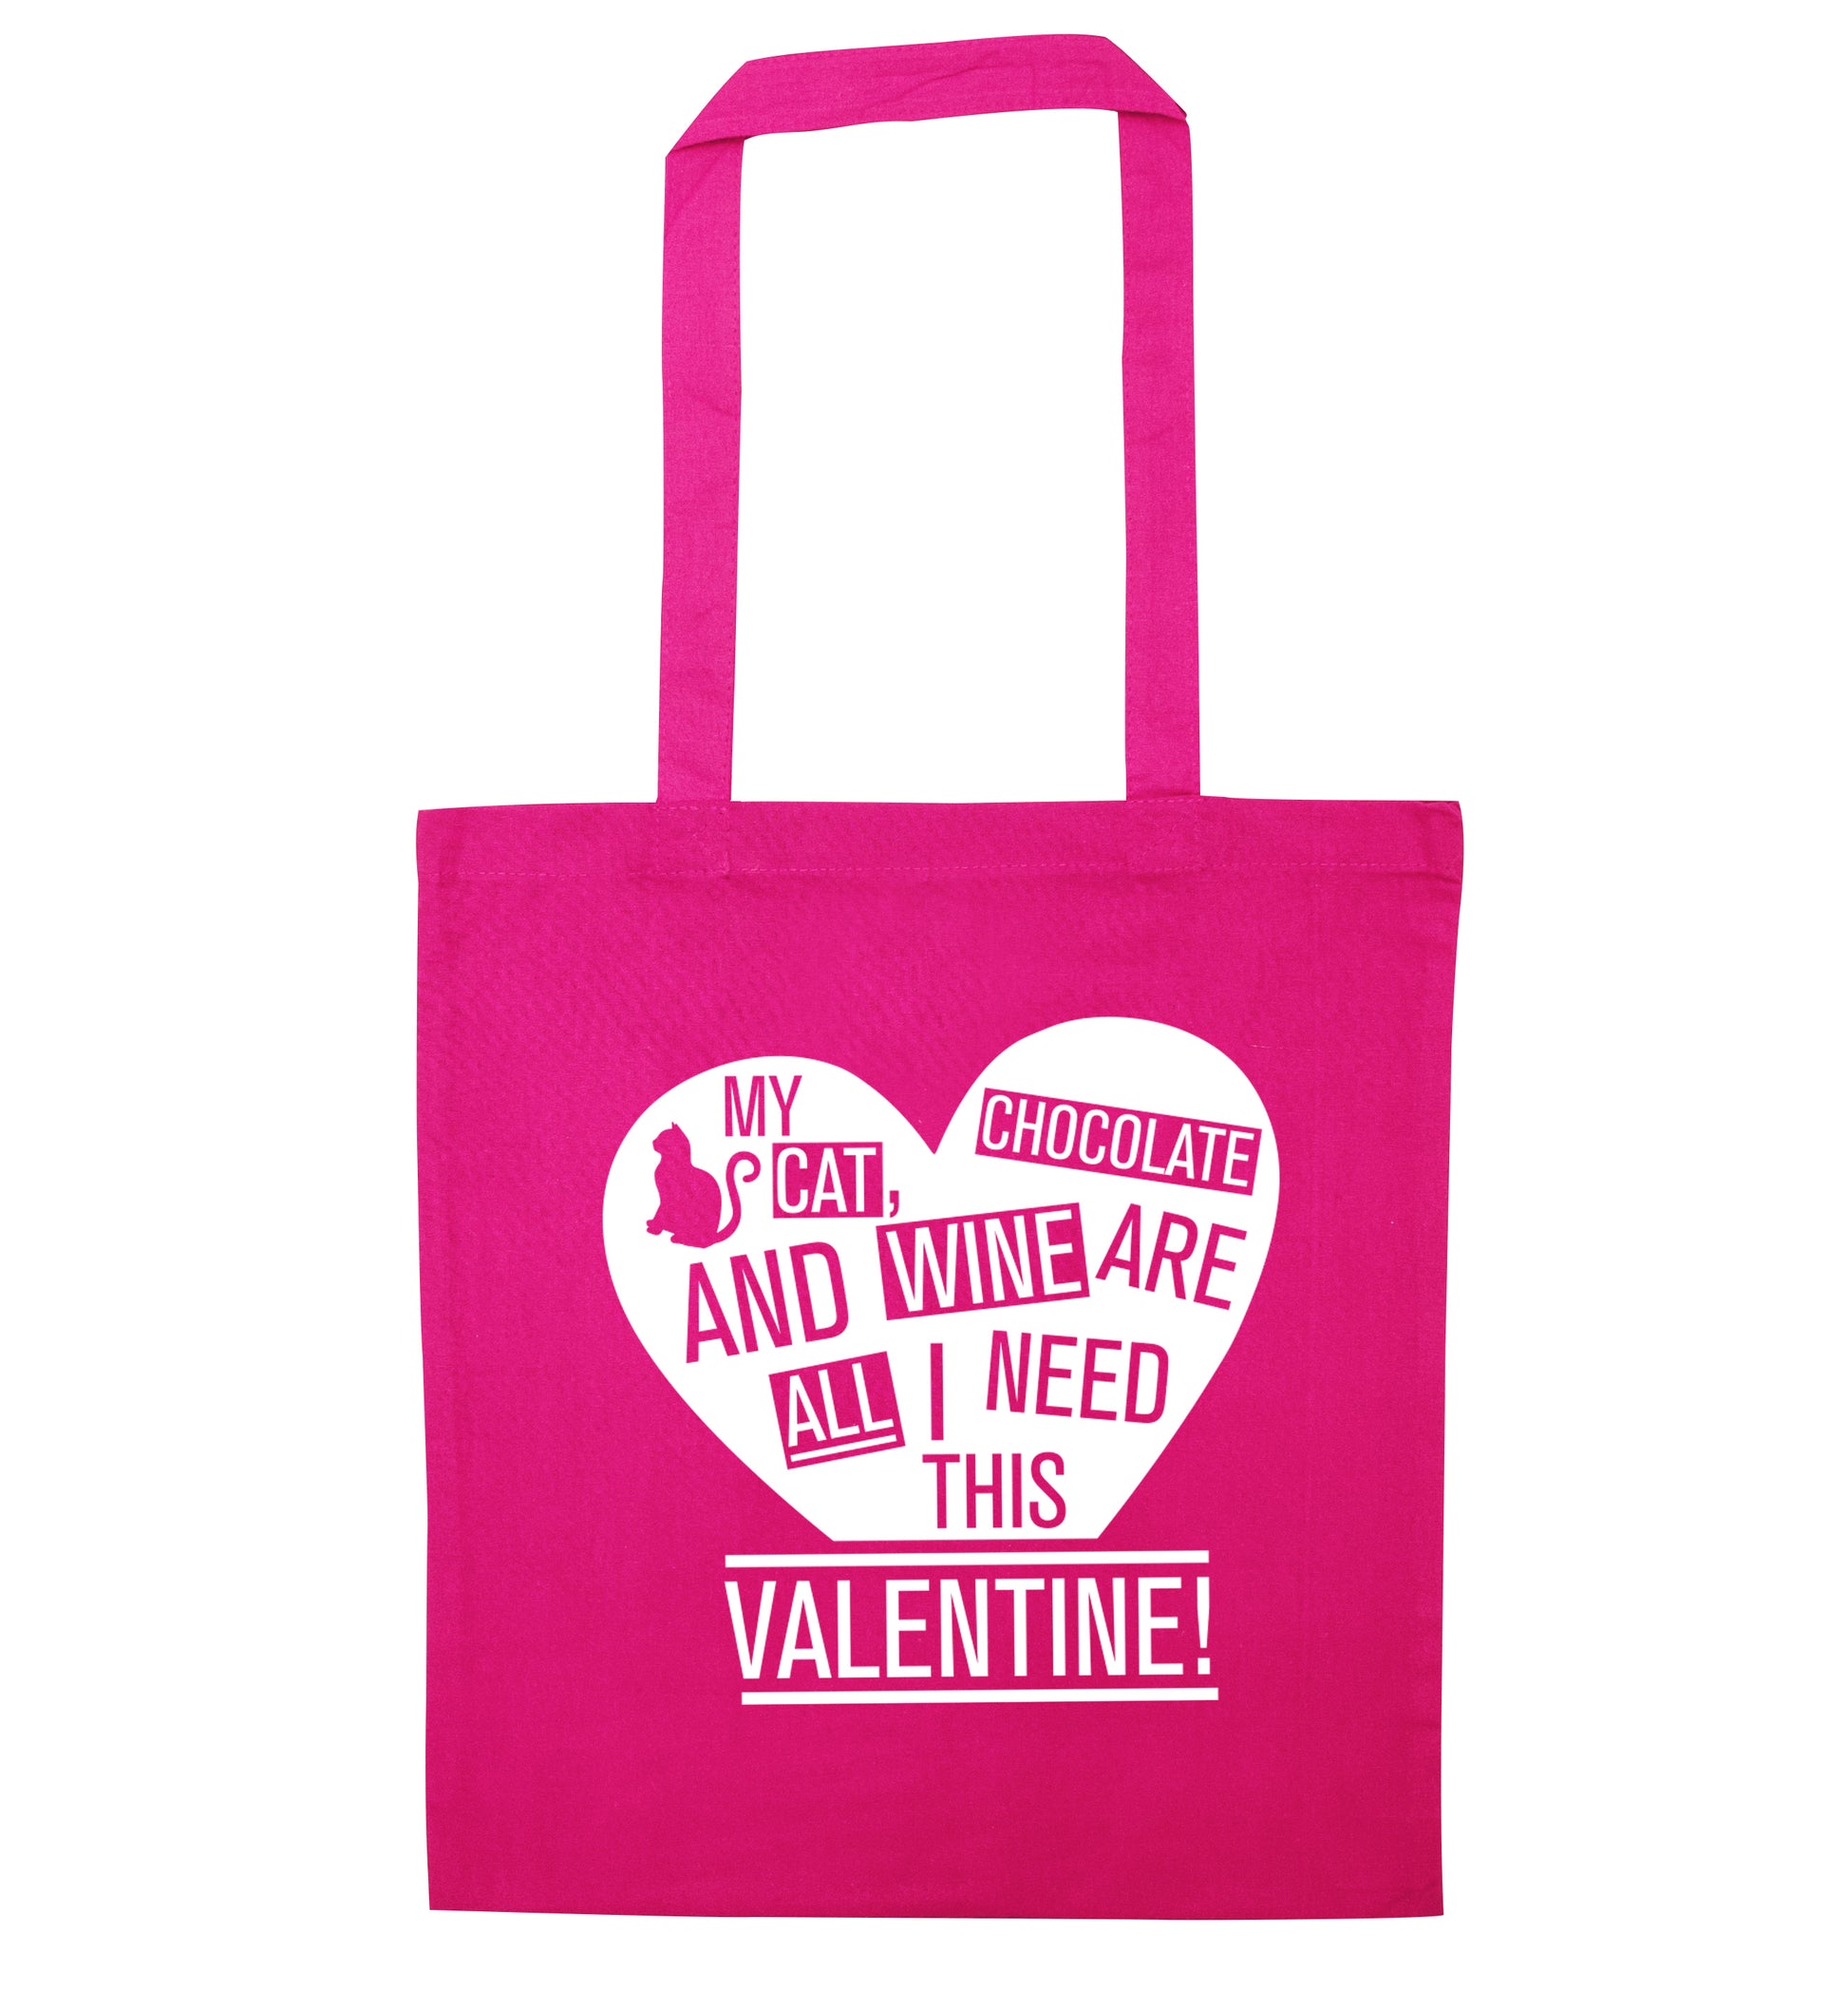 My cat, chocolate and wine are all I need this valentine! pink tote bag